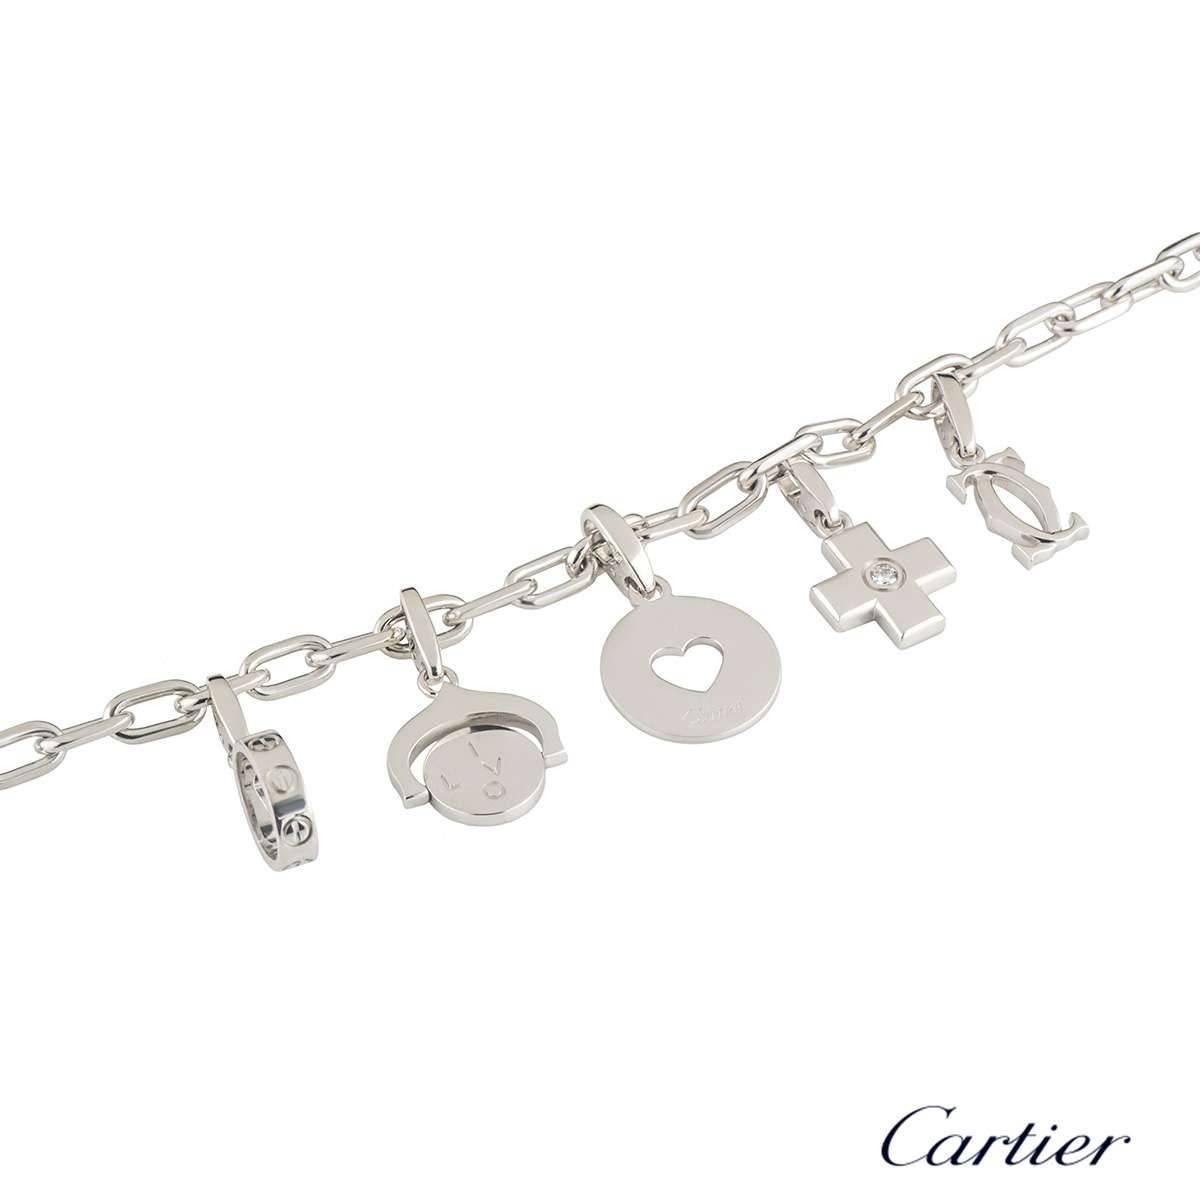 A unique 18k white gold Cartier charm bracelet. The bracelet comprises of a white gold flat cable chain with 5 Cartier charms. The first charm is a circular motif hanging off a anchored bail with letters on either side, spelling out 'I LOVE YOU'.